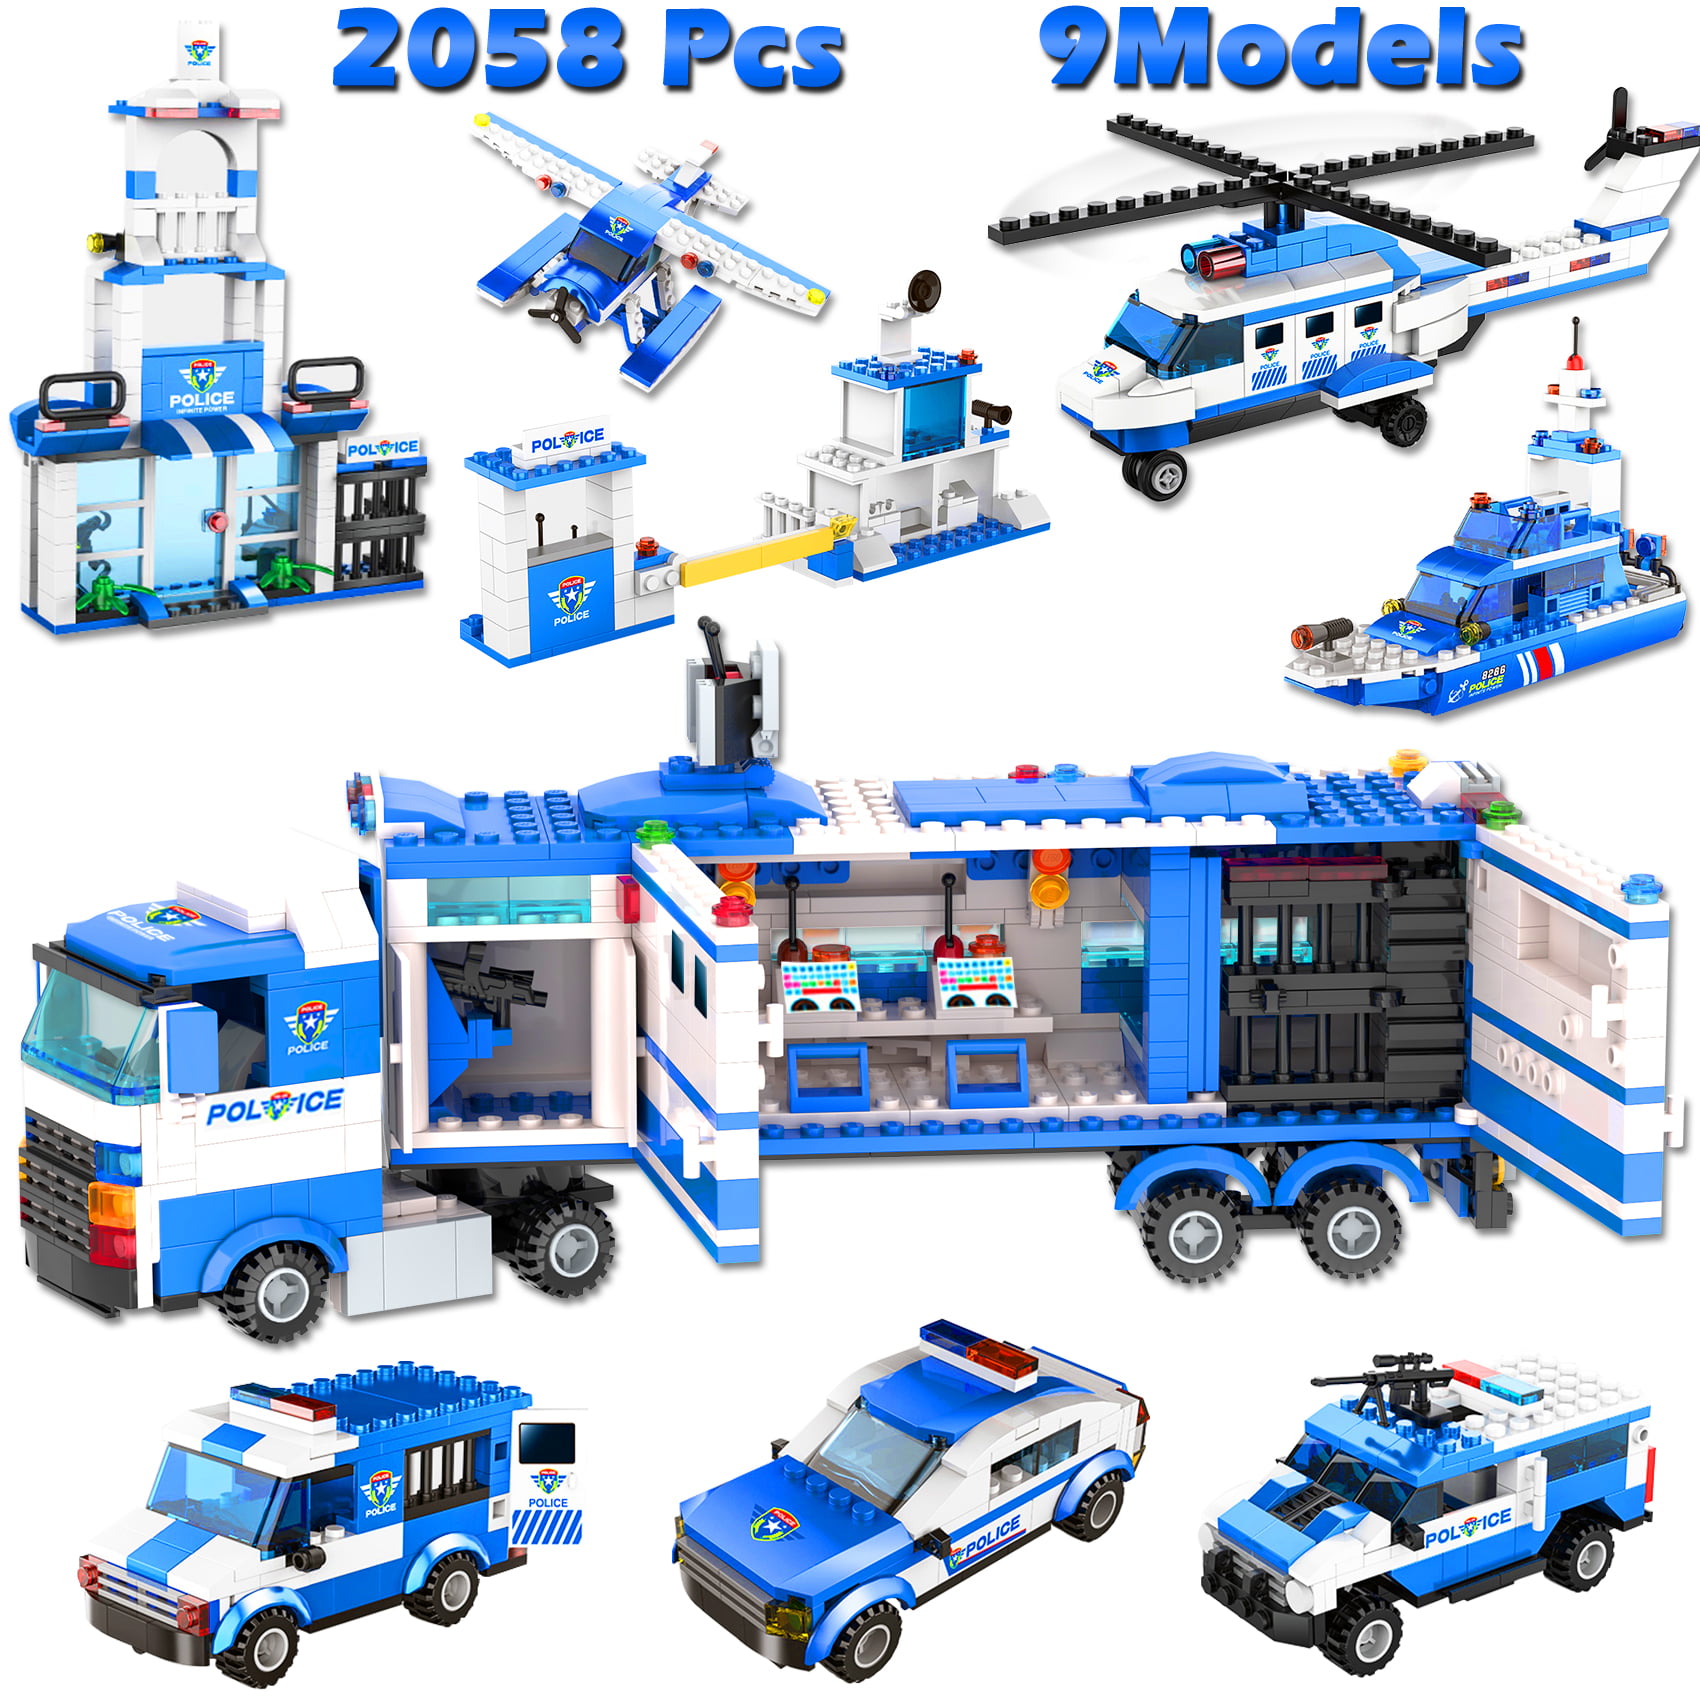 8-in-1 City Police Building Blocks Toy Set, Best Learning 